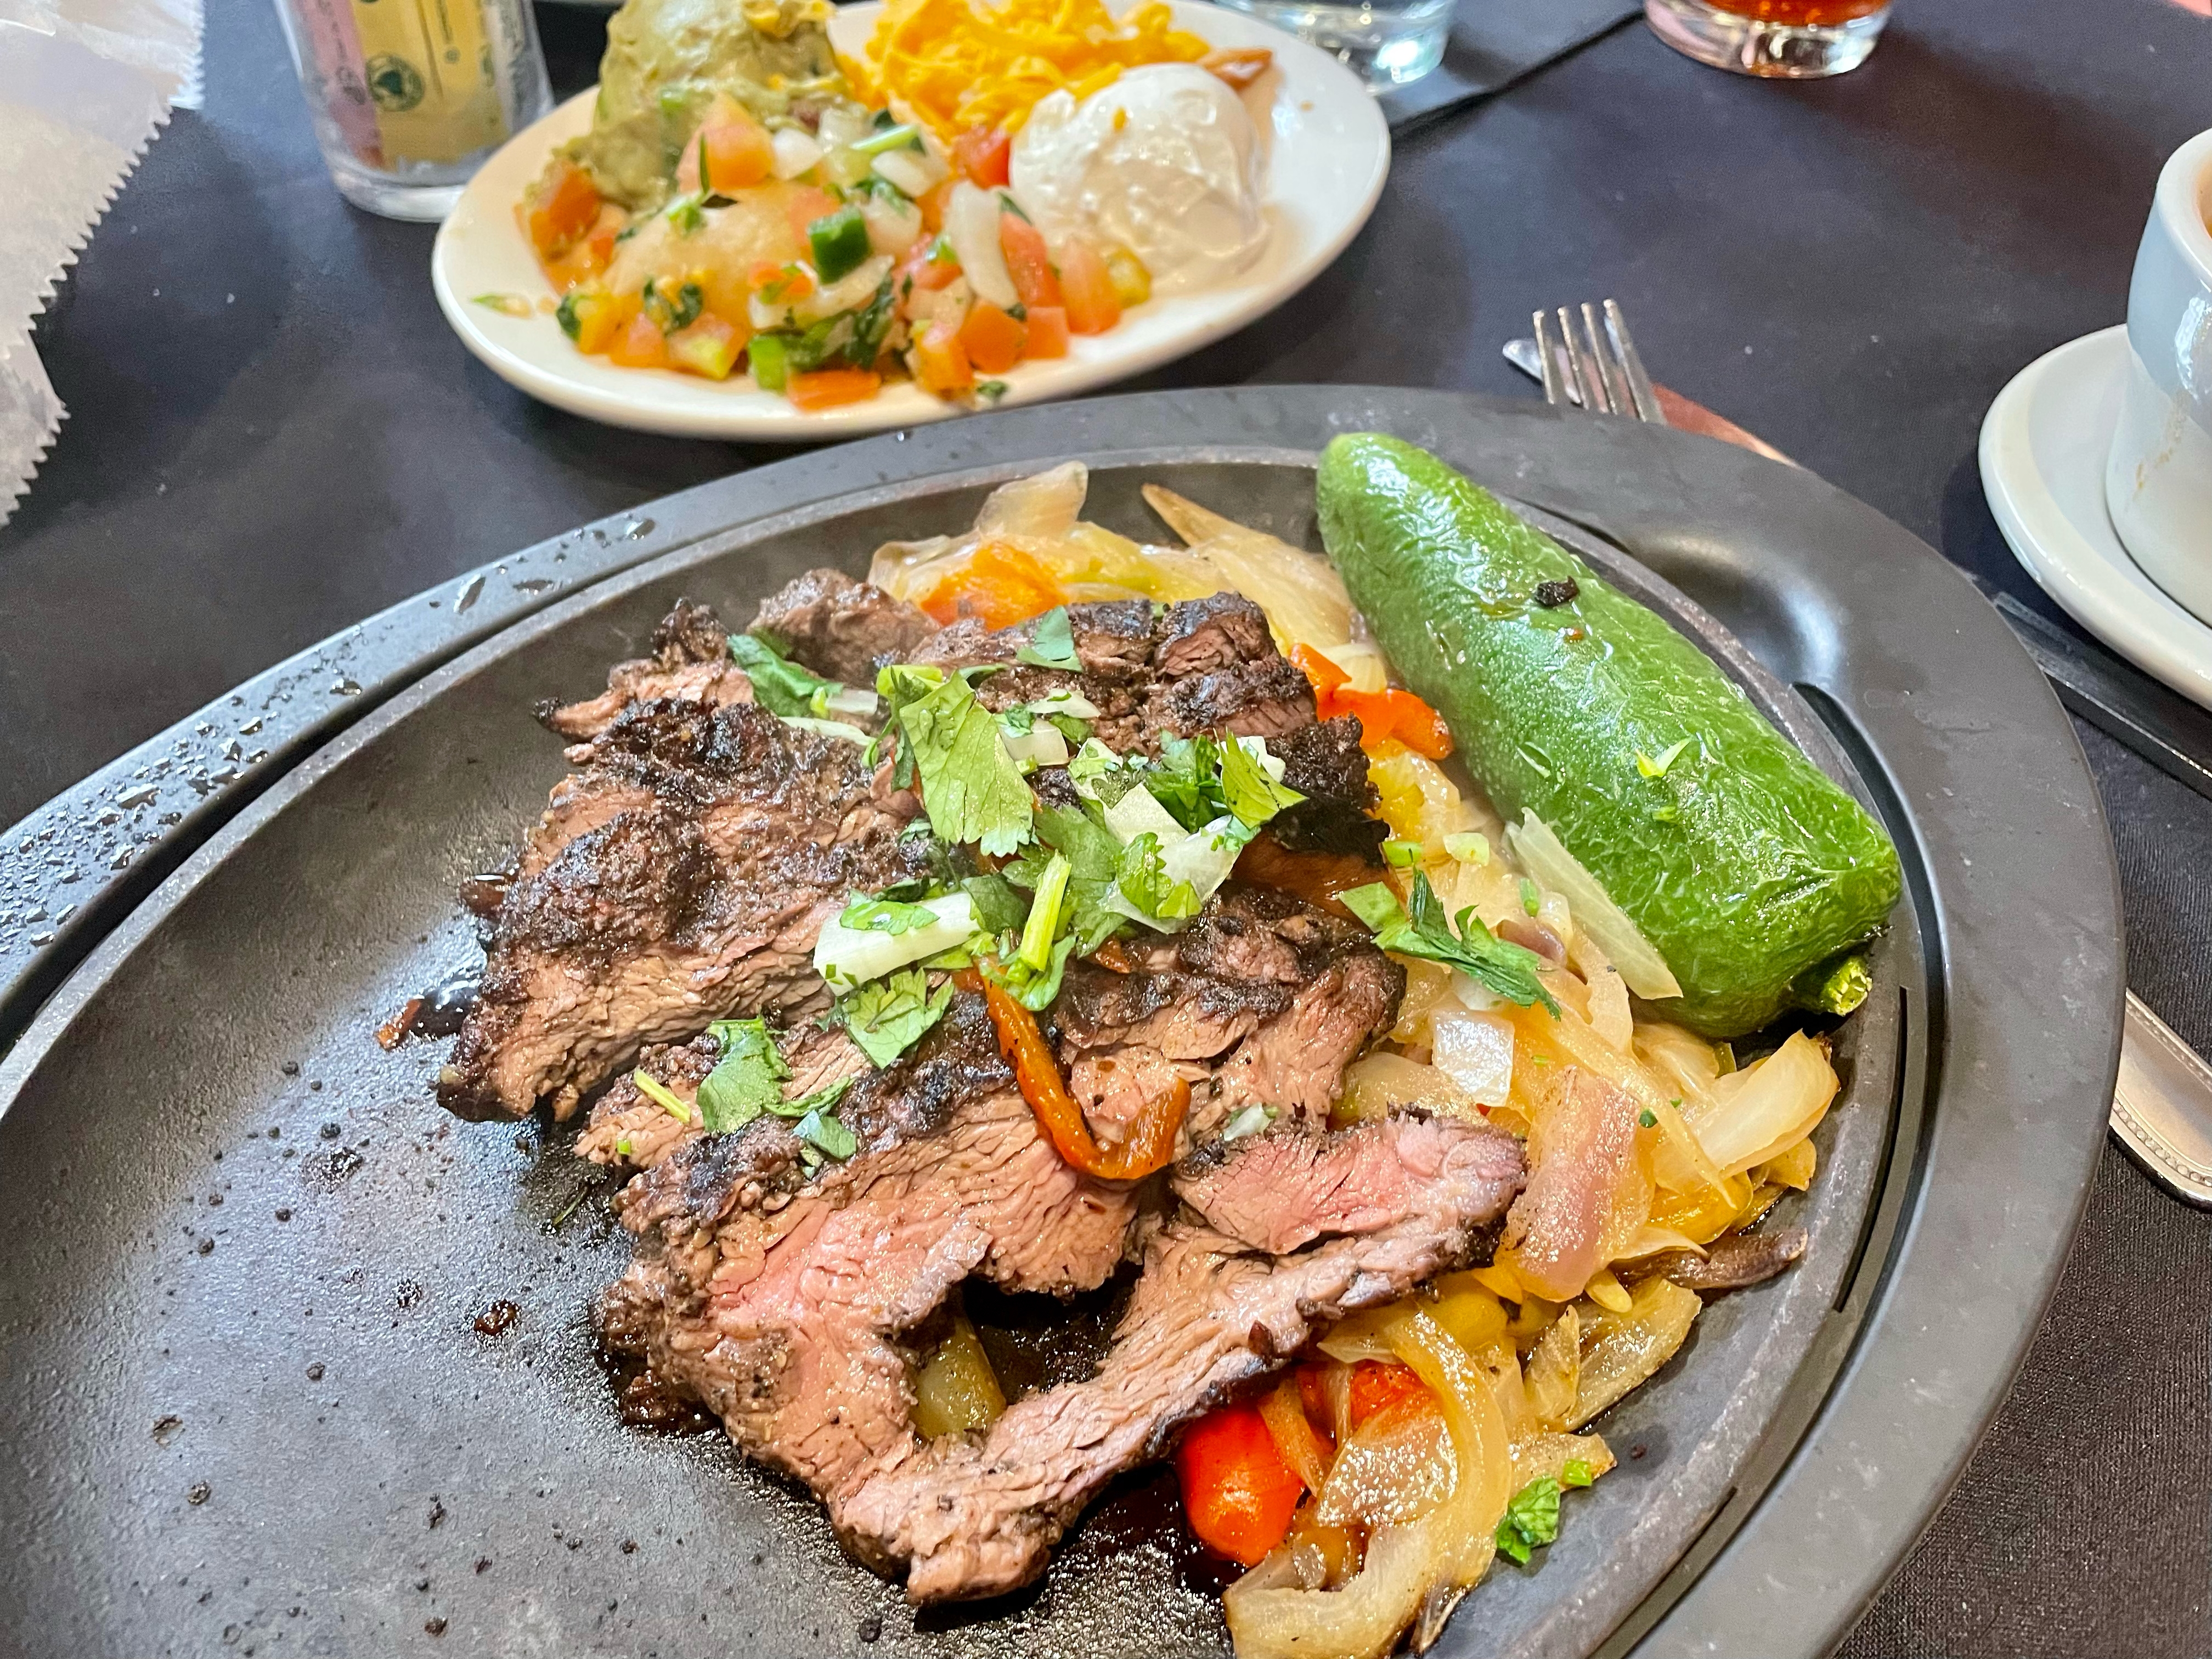 A plate of steak fajitas with onions, bell peppers, and a grilled jalapeno.